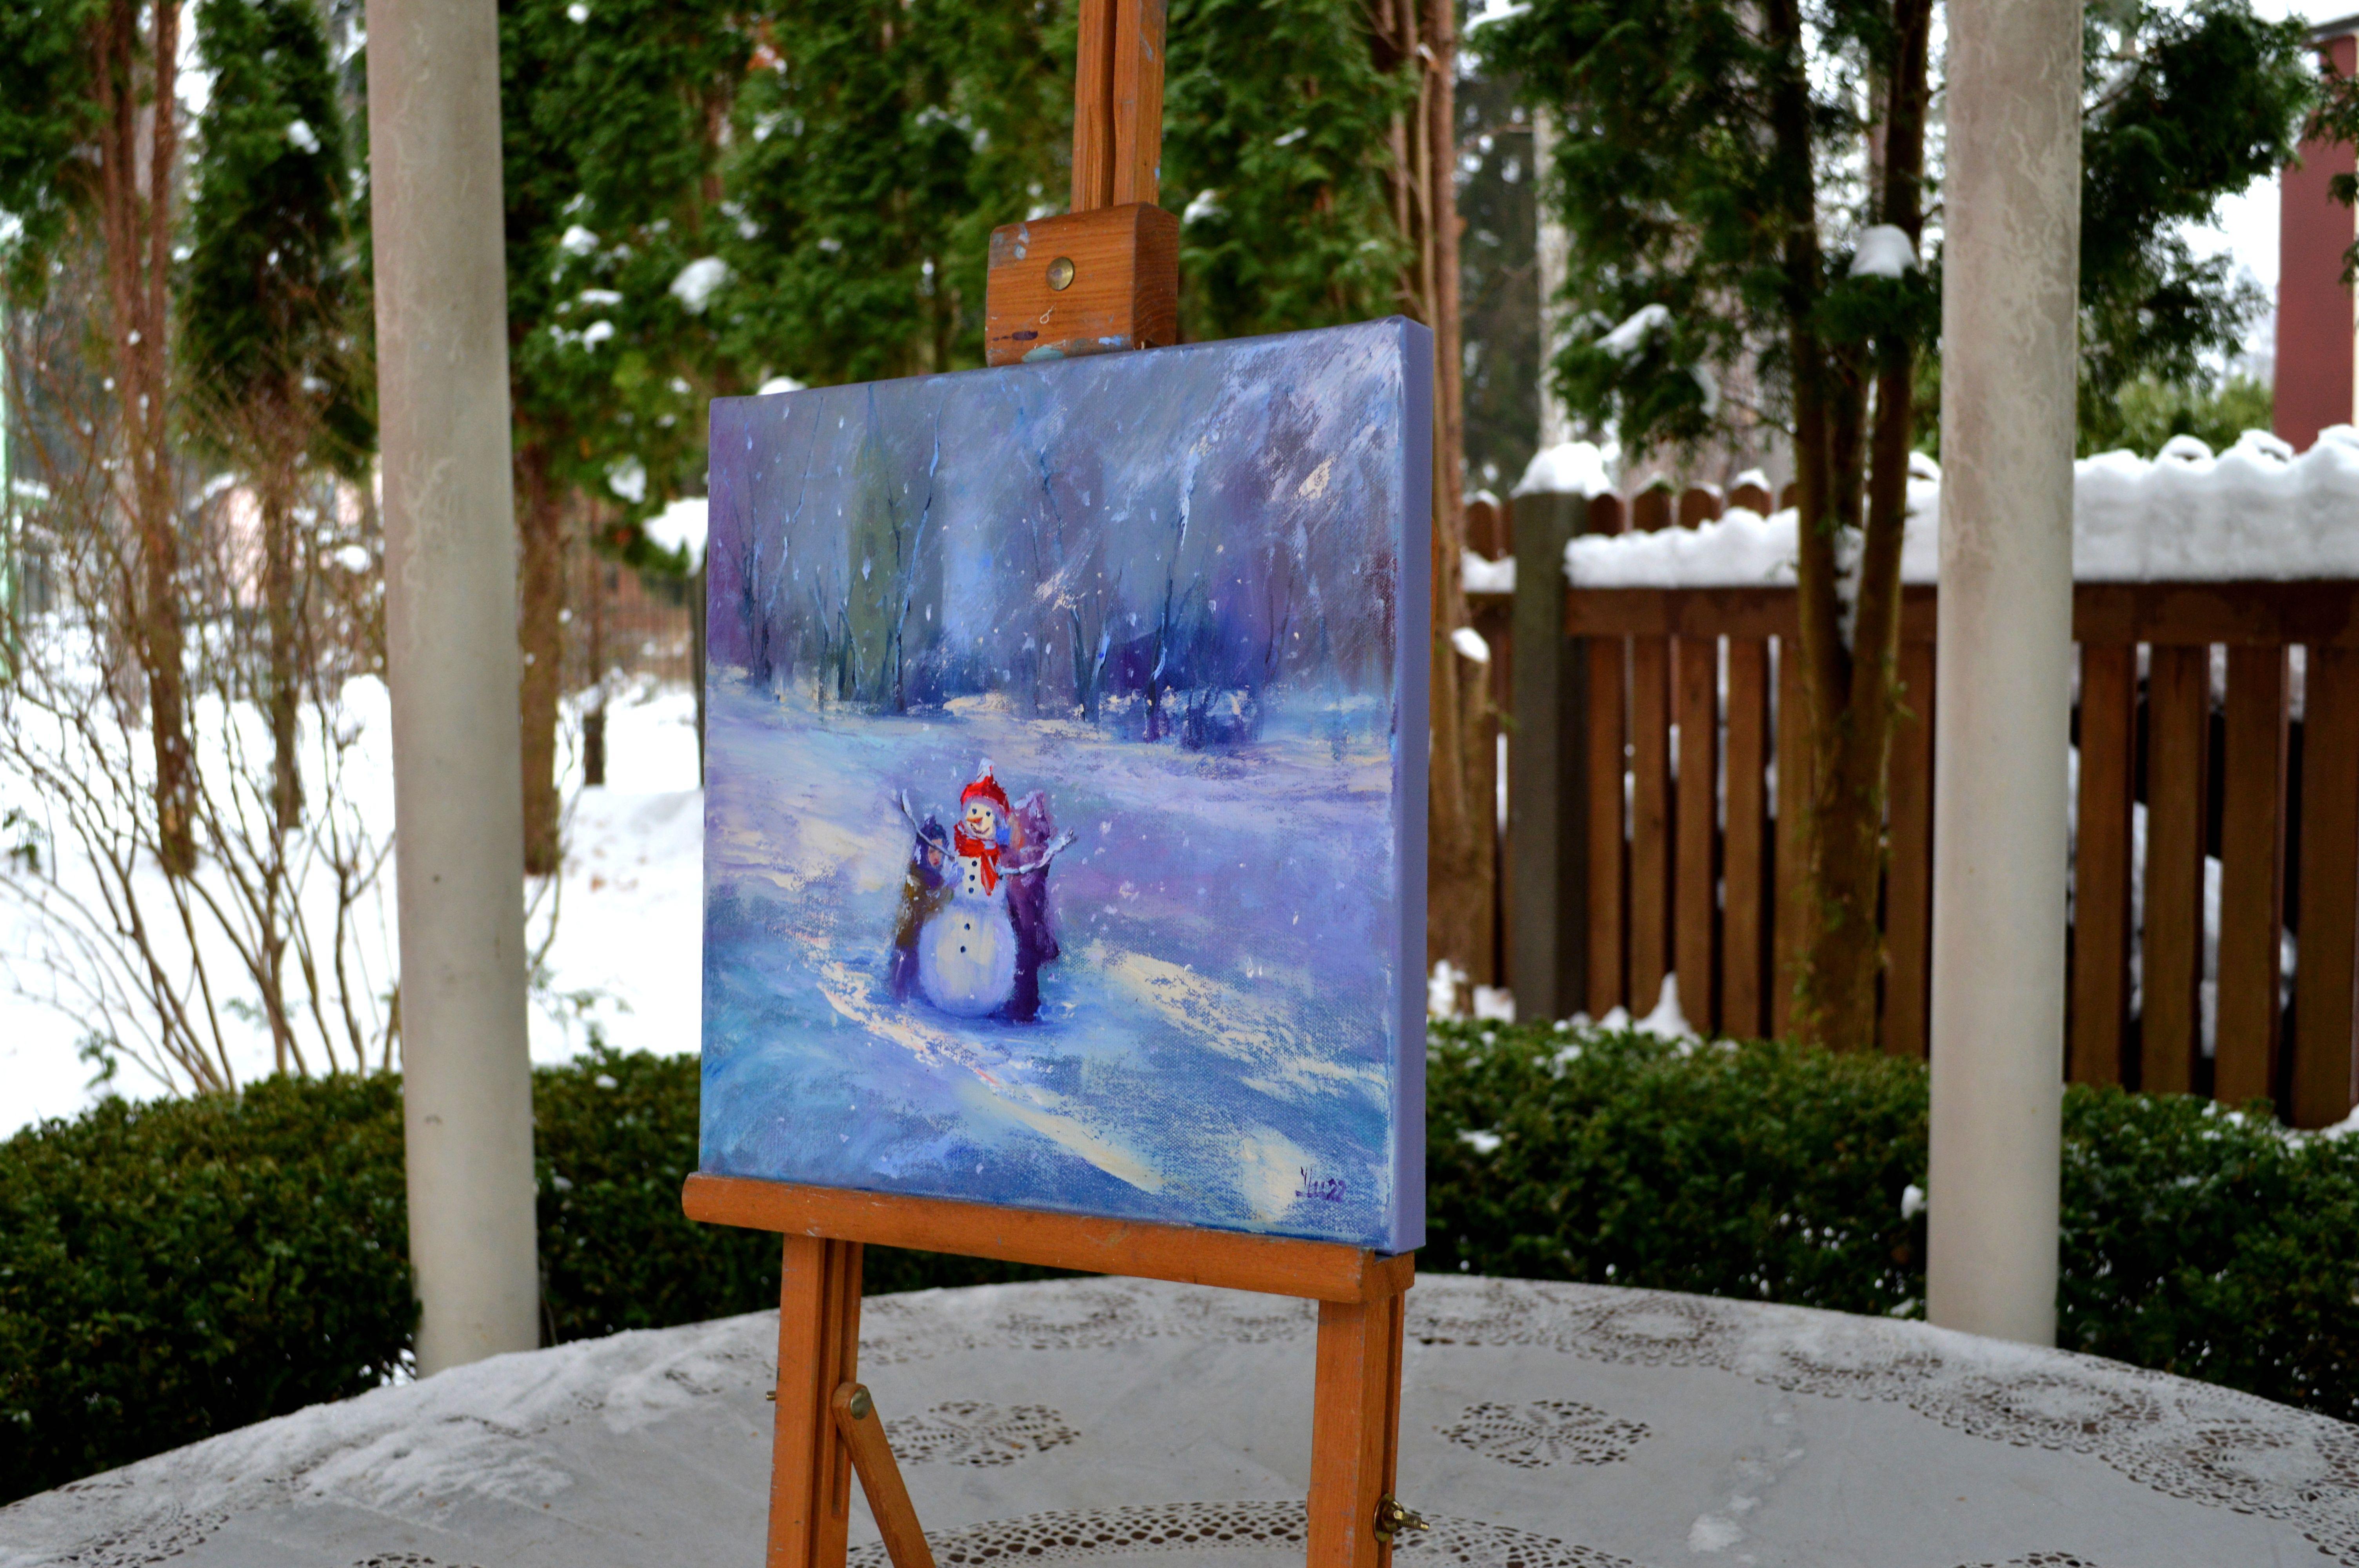 In this oil painting, I've captured a whimsical winter moment filled with joy and serenity. The snowman, graced with a cheerful smile, stands as a symbol of the simple pleasures and playful spirit of the season. The expressionistic brushstrokes and